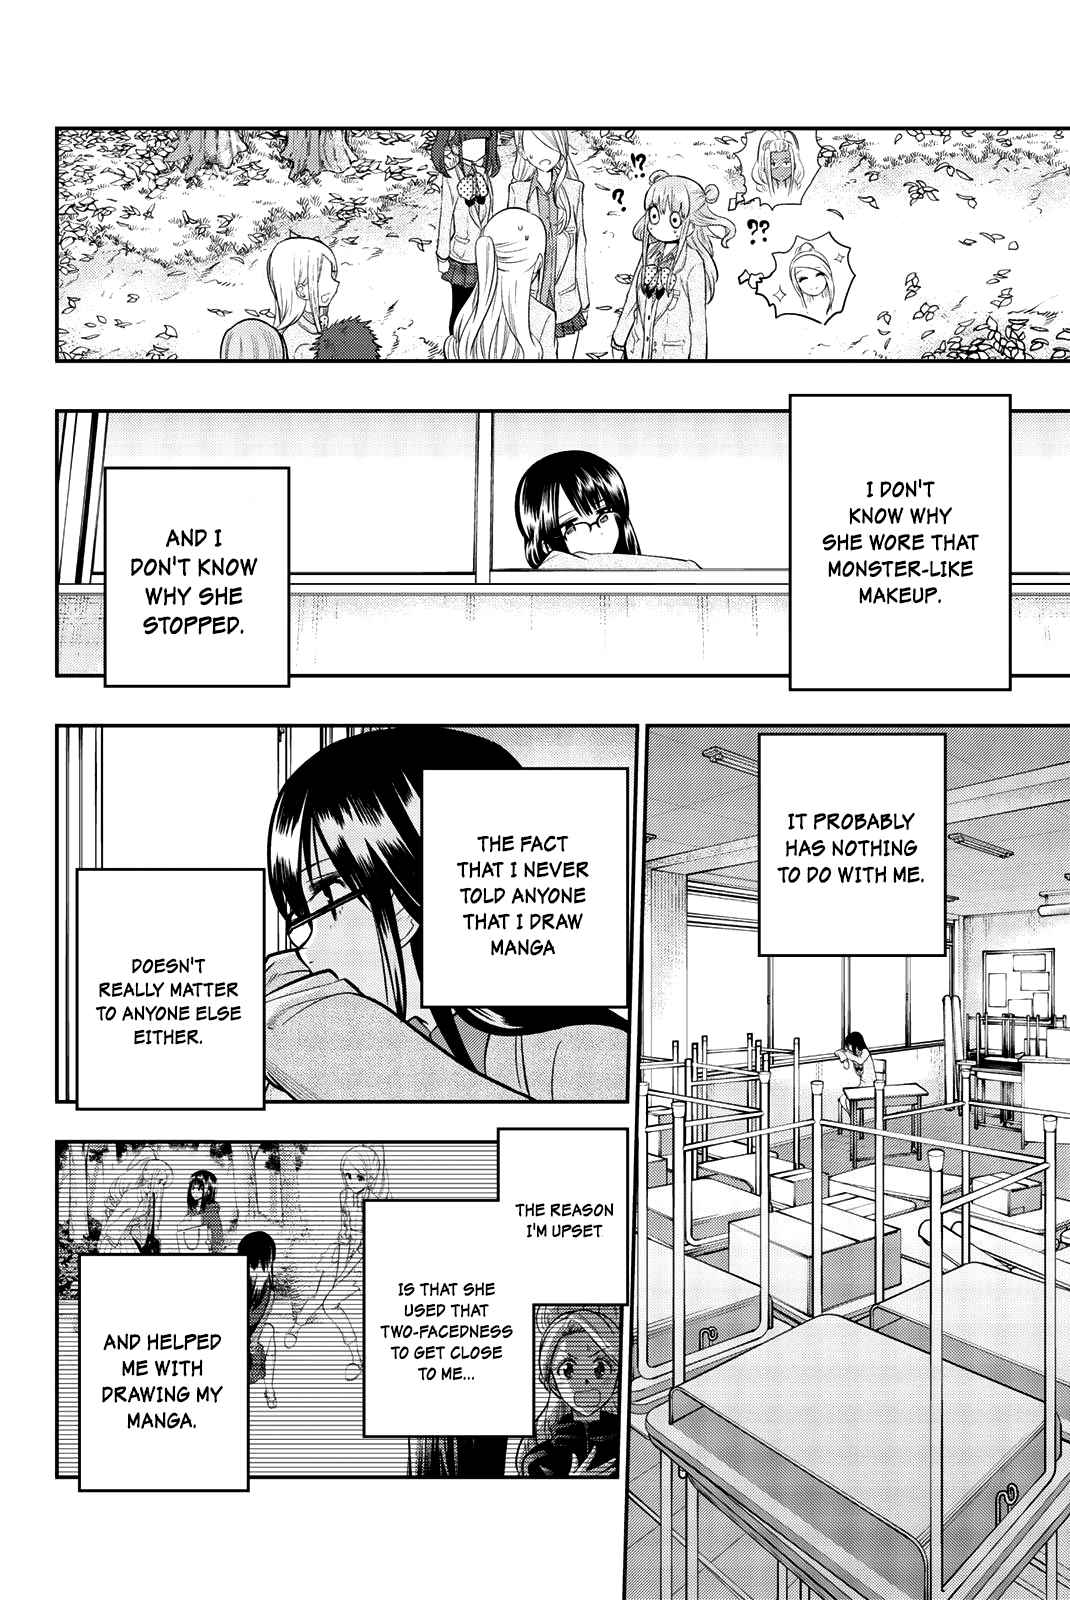 Hoshino, Me wo Tsubutte Vol. 9 Ch. 73 Dreaming With Her